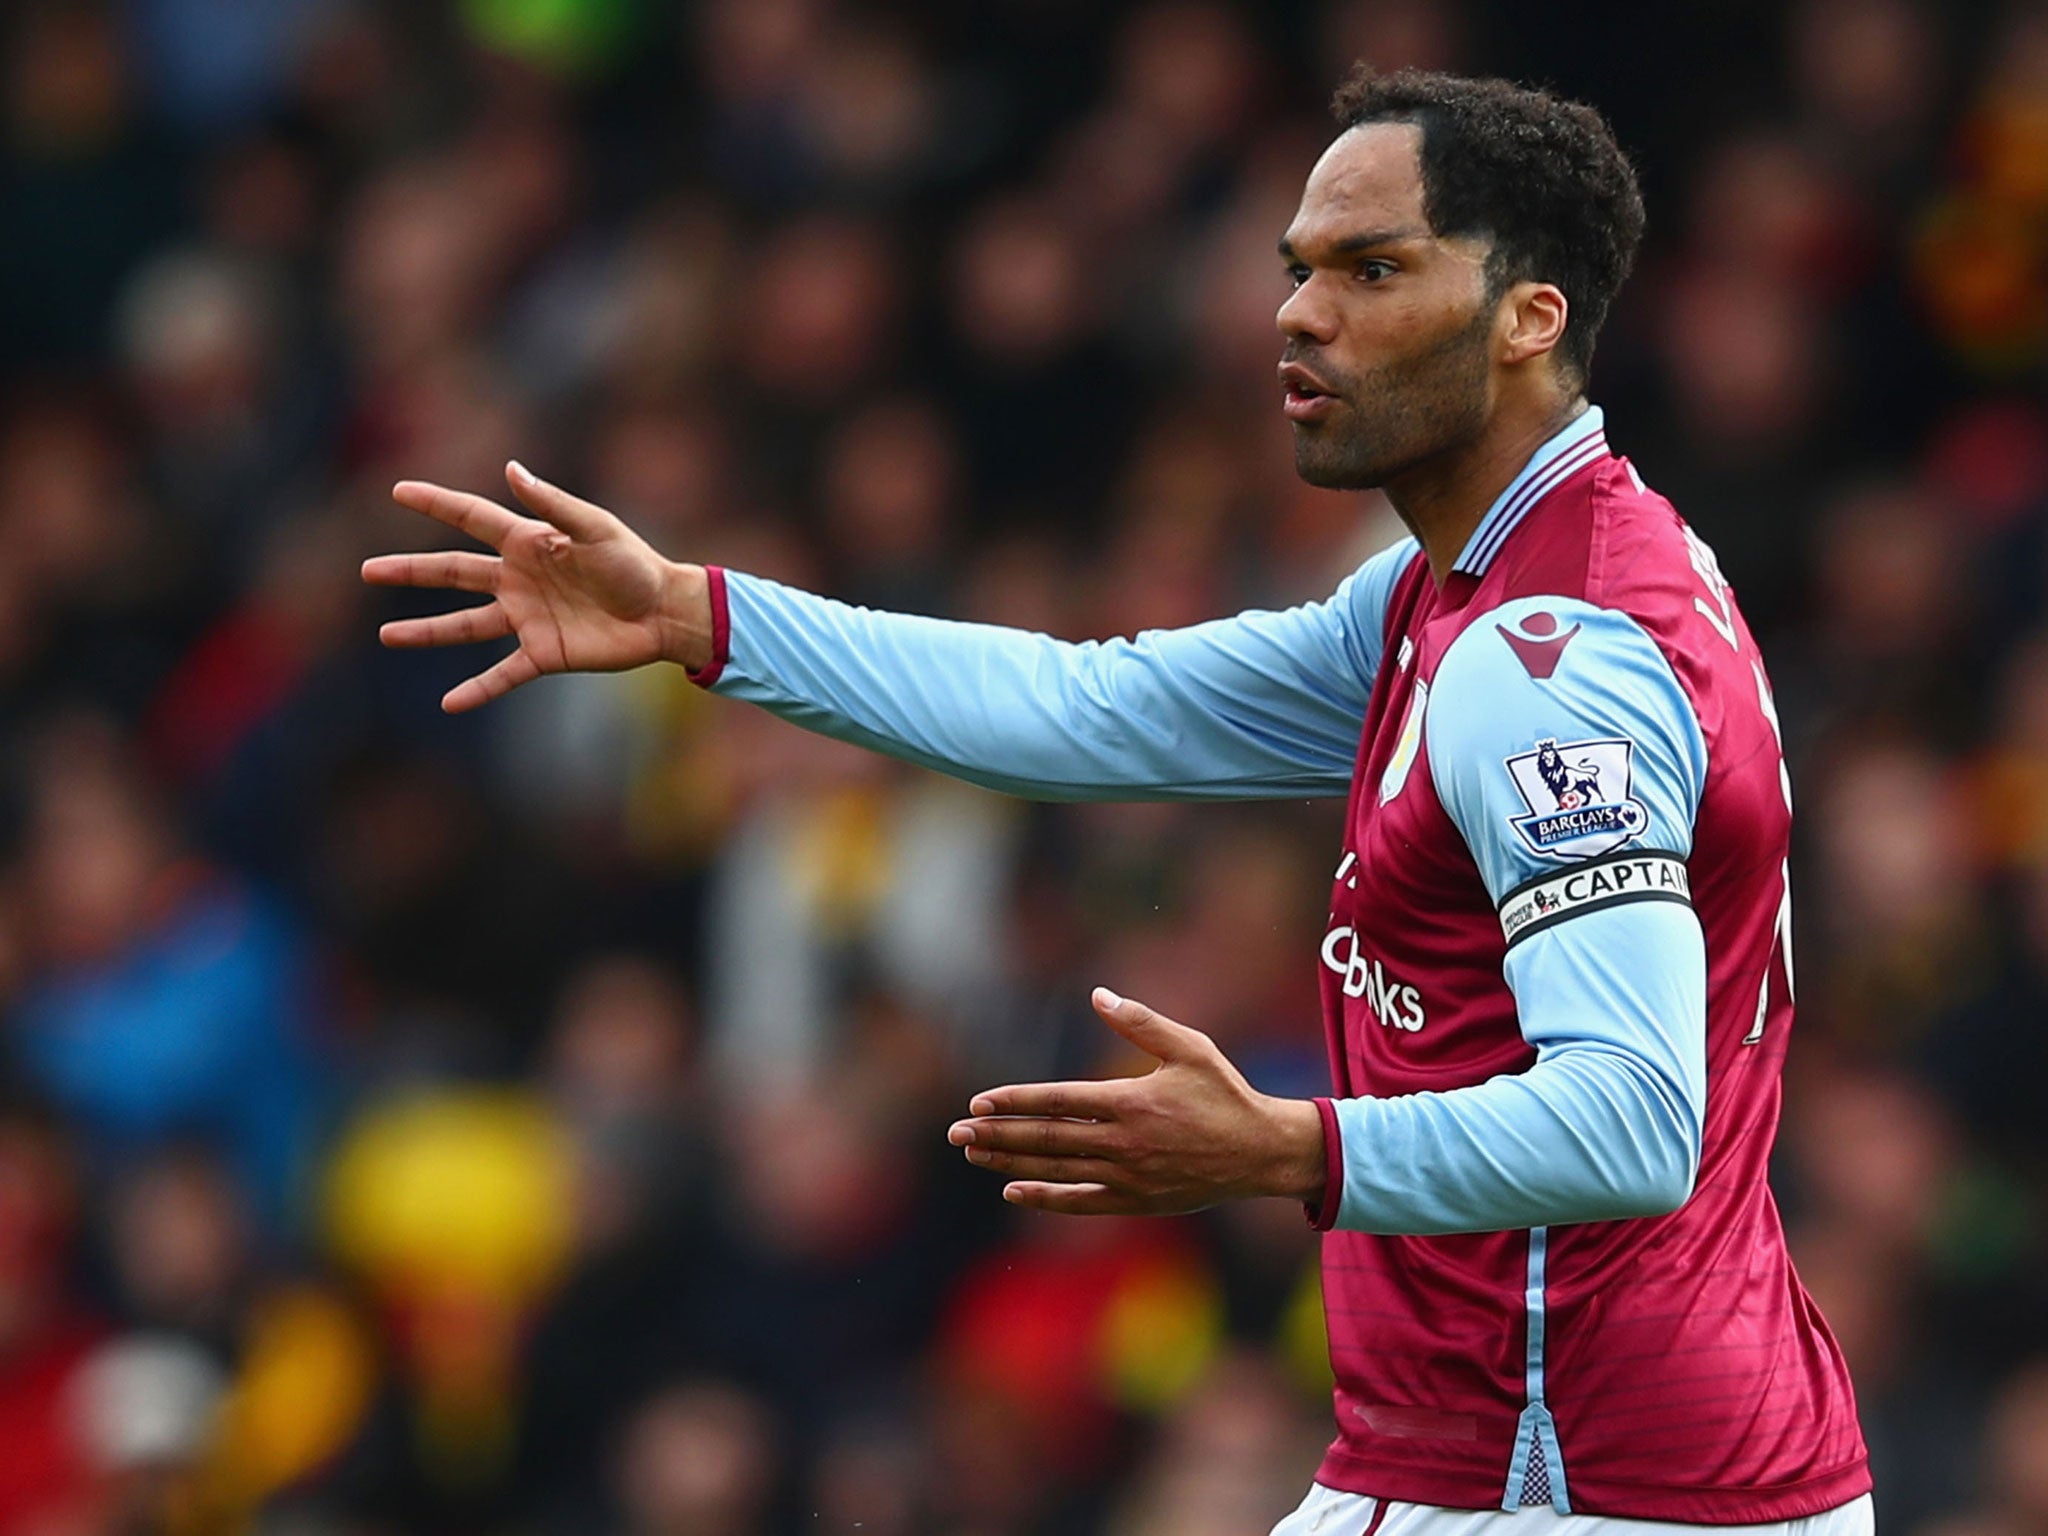 Lescott has joined following his release from Greek side AEK Athens in November